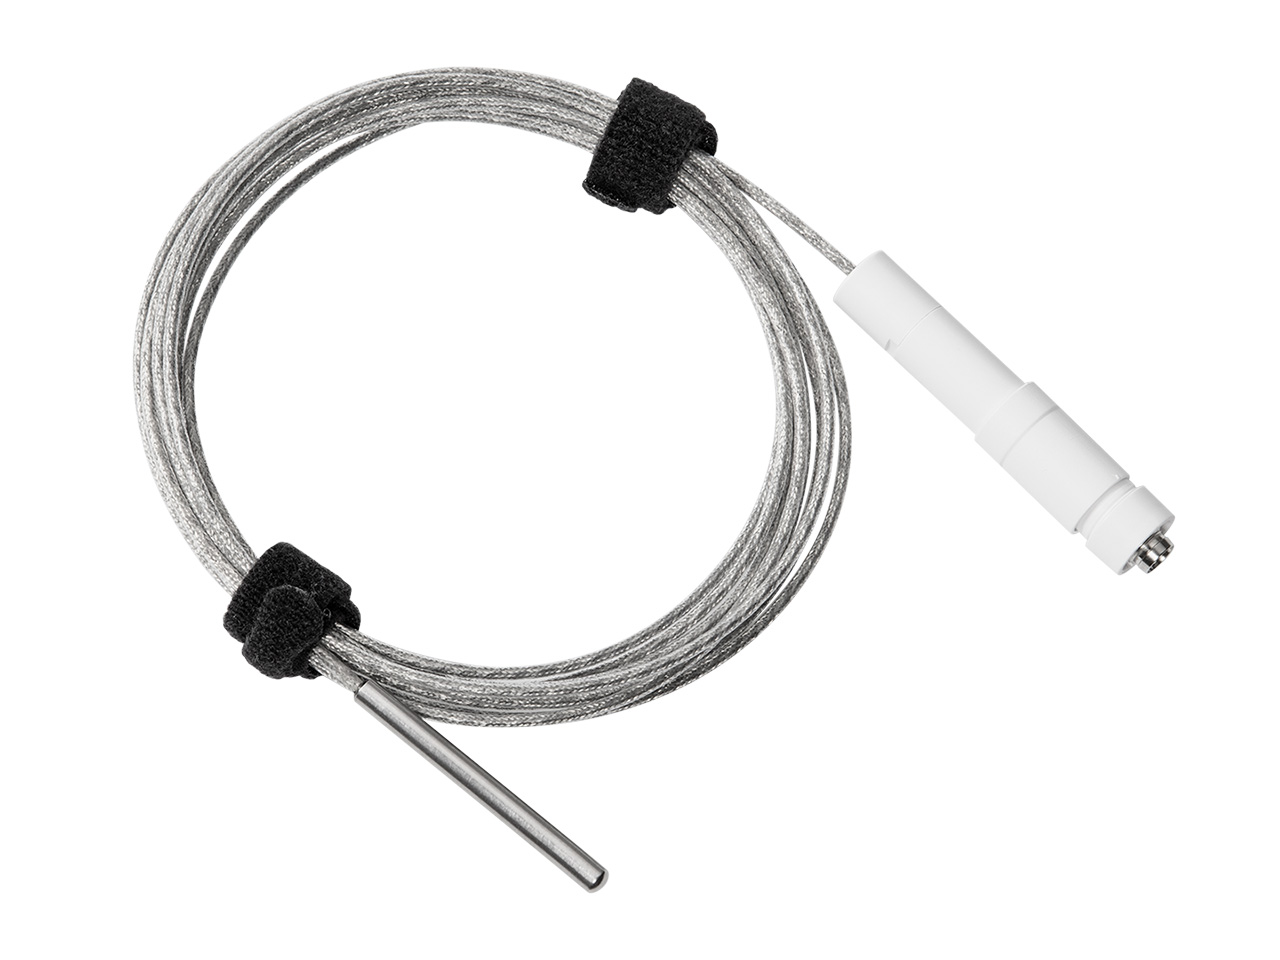 TMP115 temperature probe 3M extension cable